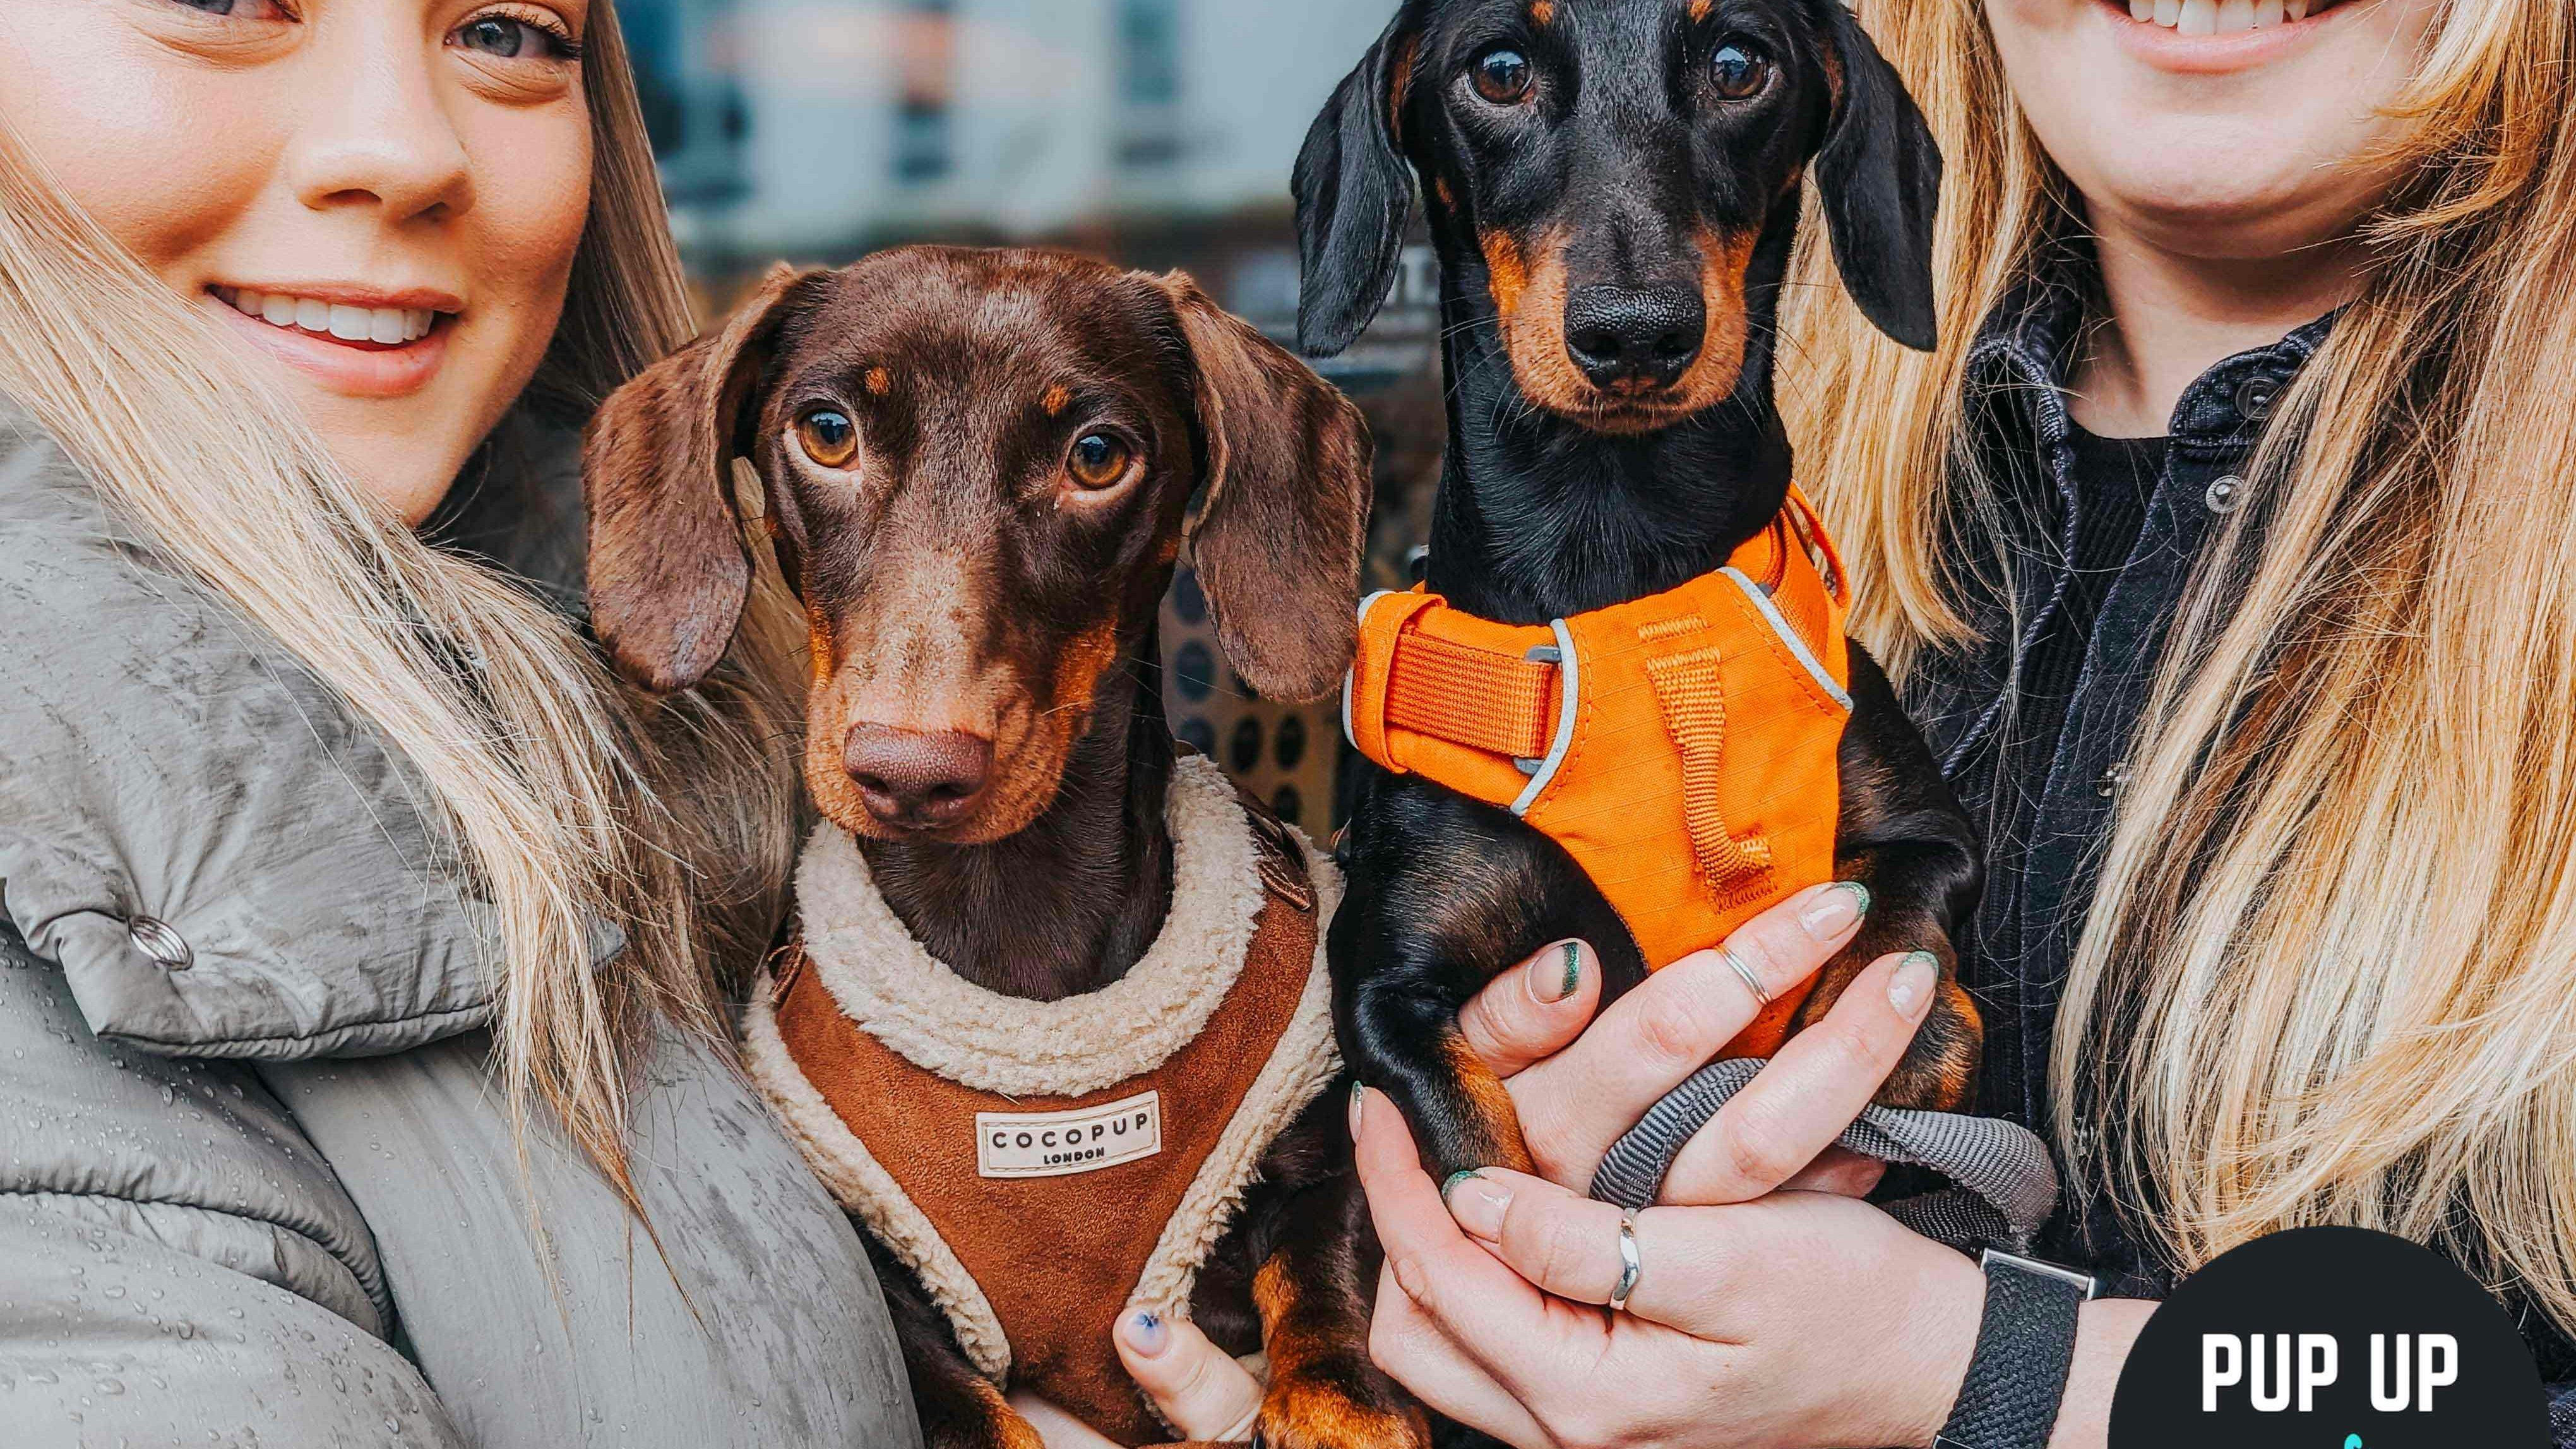 Dachshund Pup Up Cafe – Southend